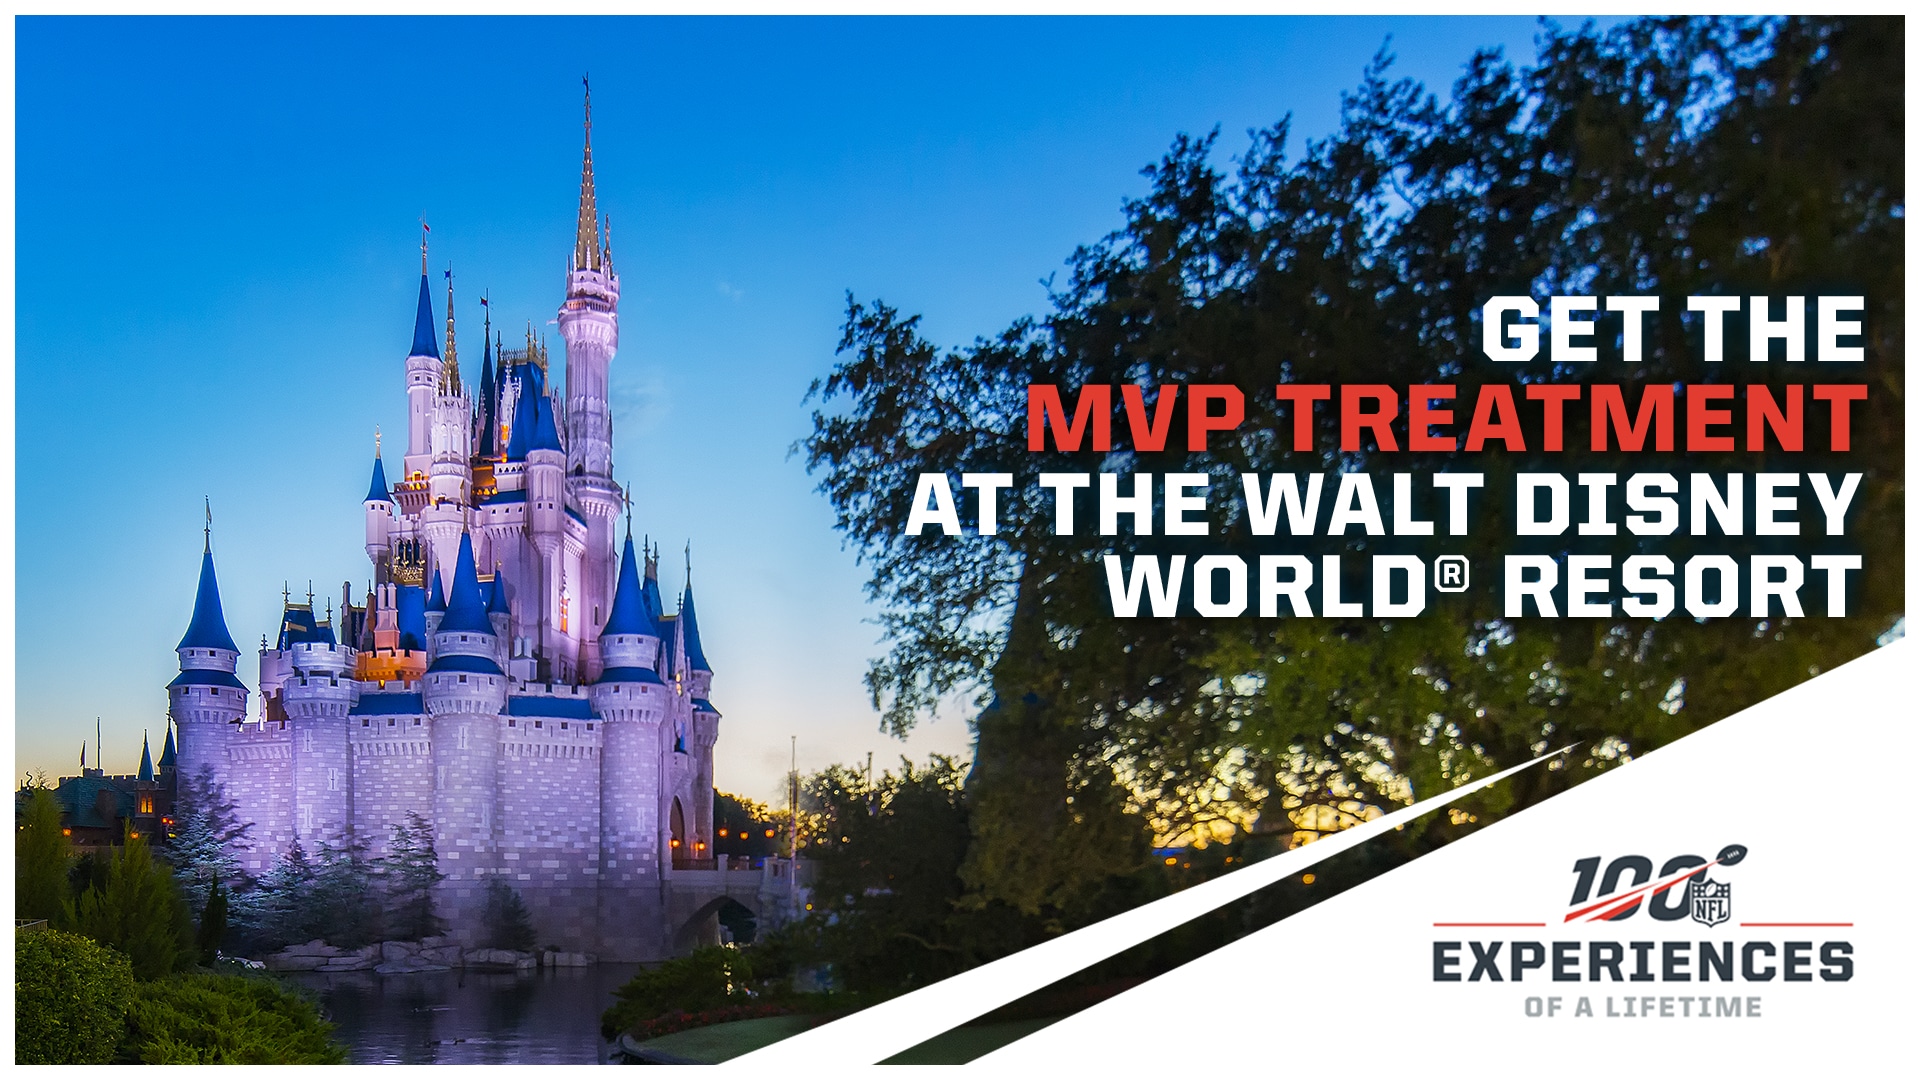 Get an NFL Experience of a Lifetime with a Super Bowl Champion at Walt Disney World Resort